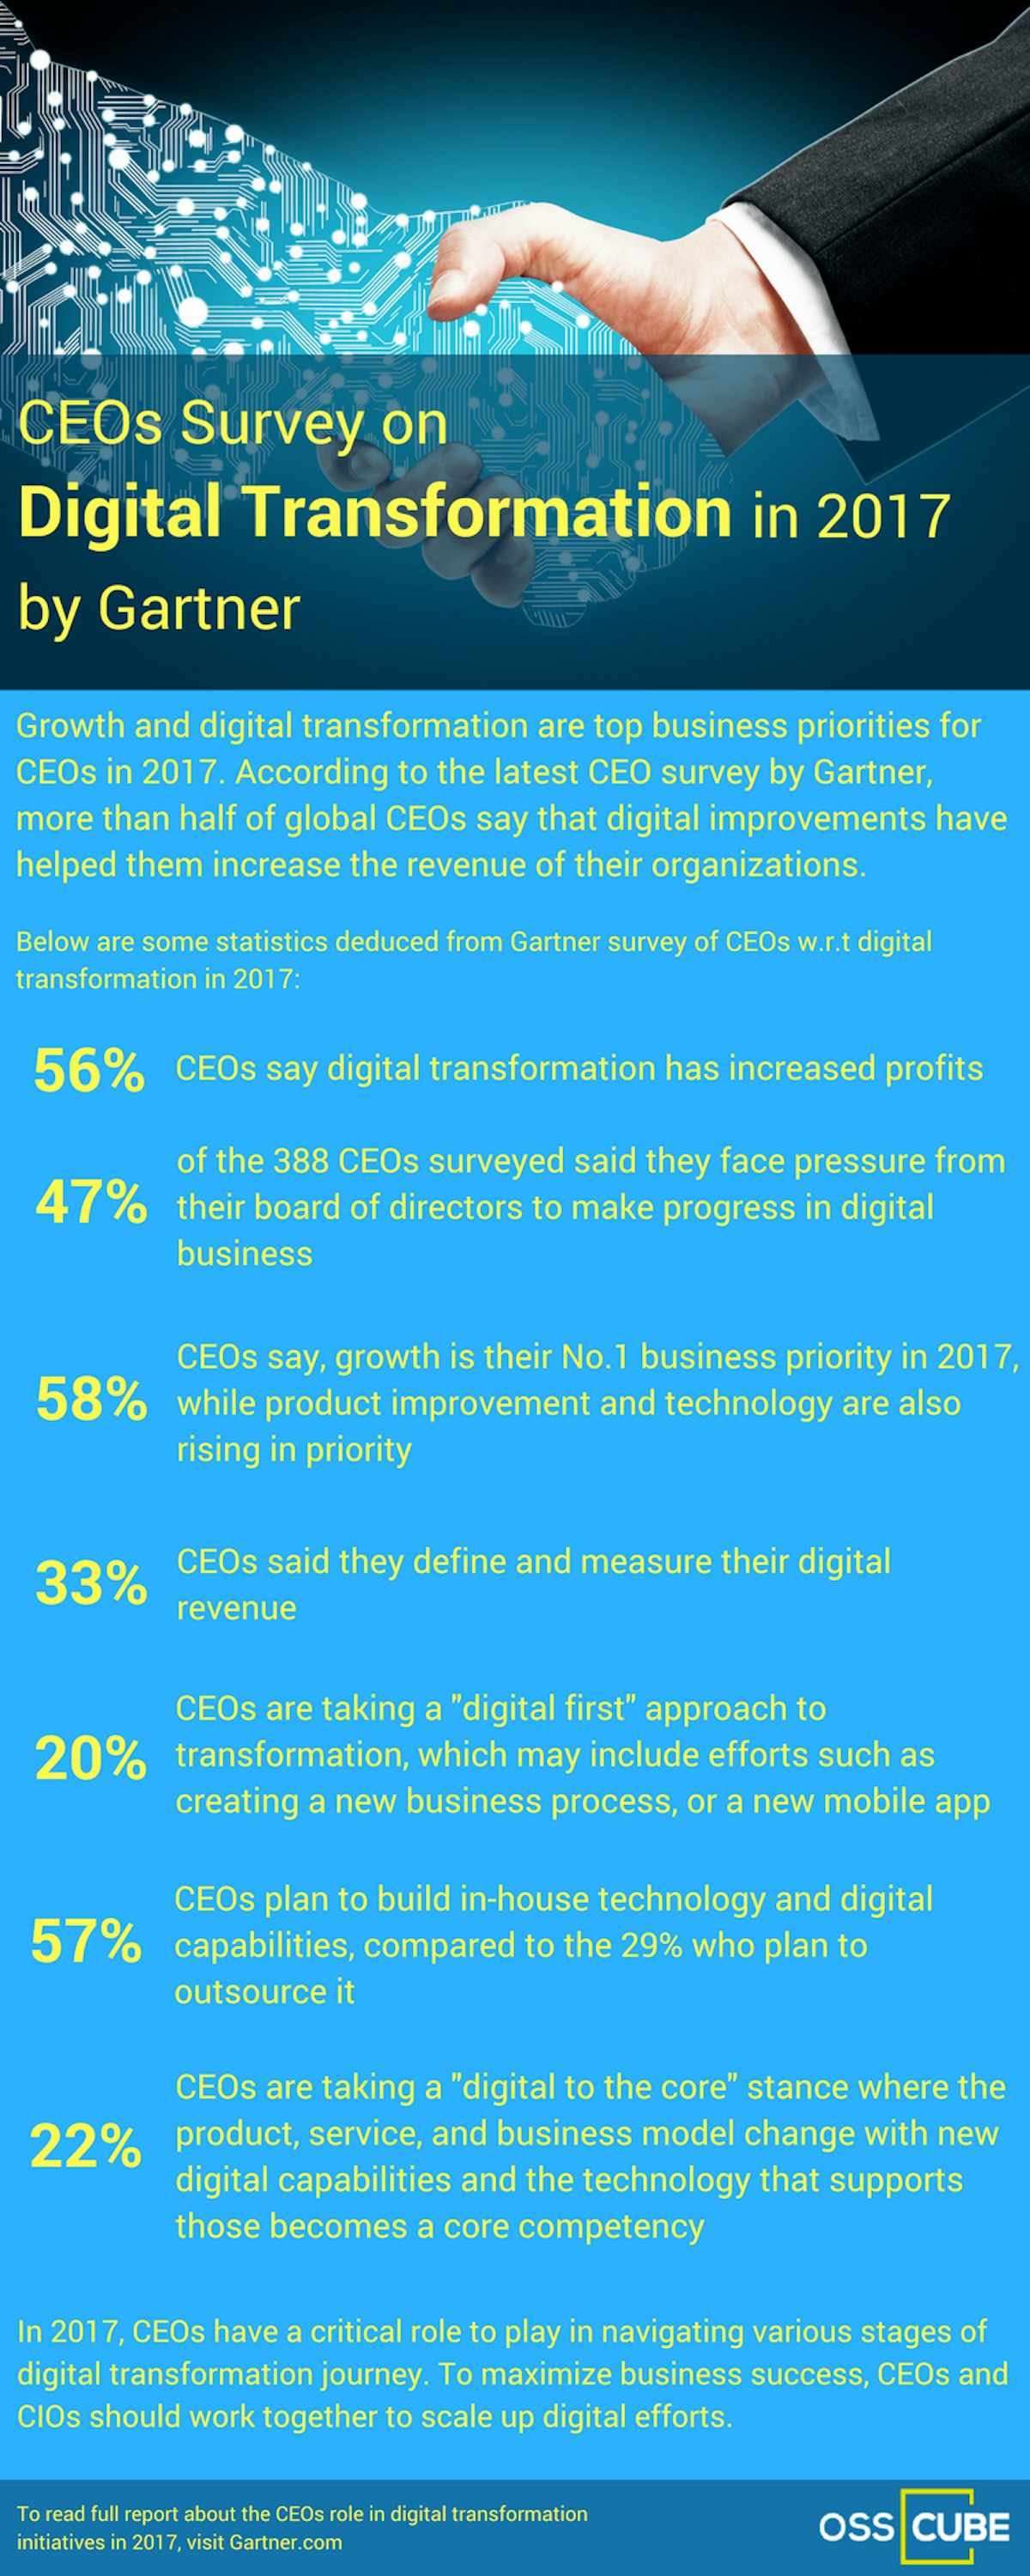 featured image - CEOs Survey on Digital Transformation in 2017 by Gartner